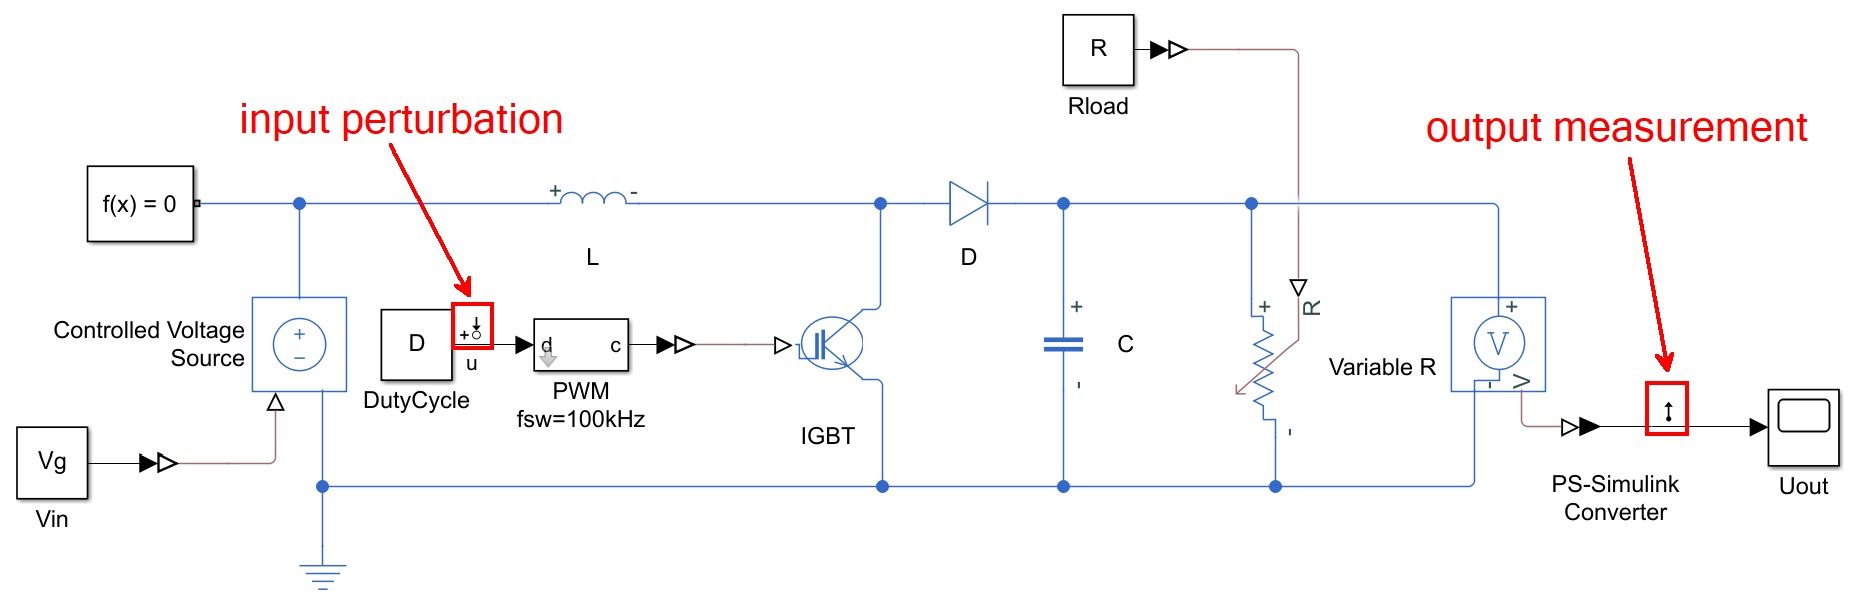 Figure 1. Switch-mode open-loop boost converter model with input perturbation and output measurement.